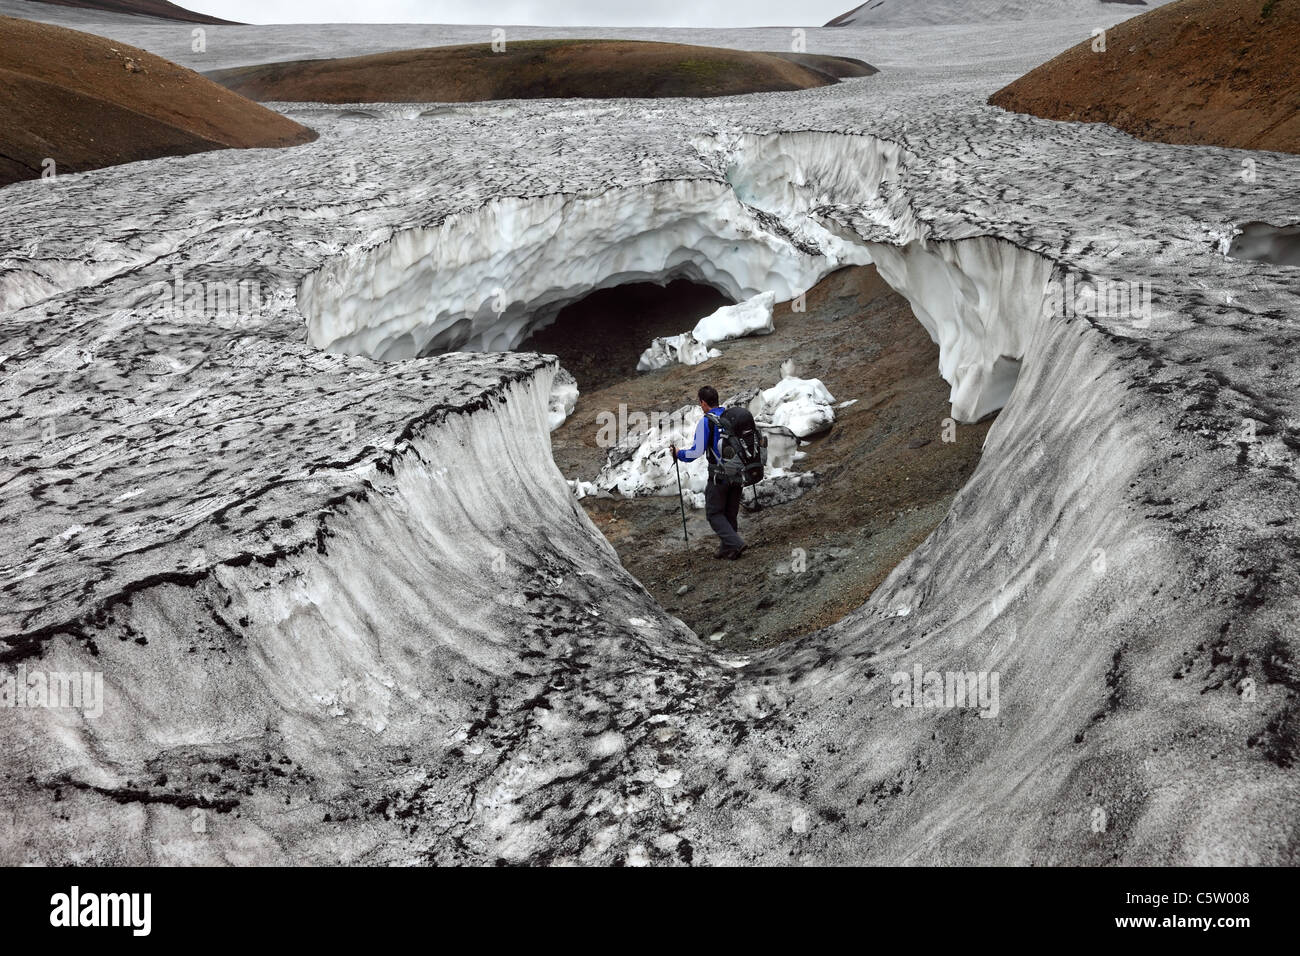 Trekker Safely Exploring a Collapsed Ice Cave on the Laugavegur Hiking Trail Iceland Stock Photo